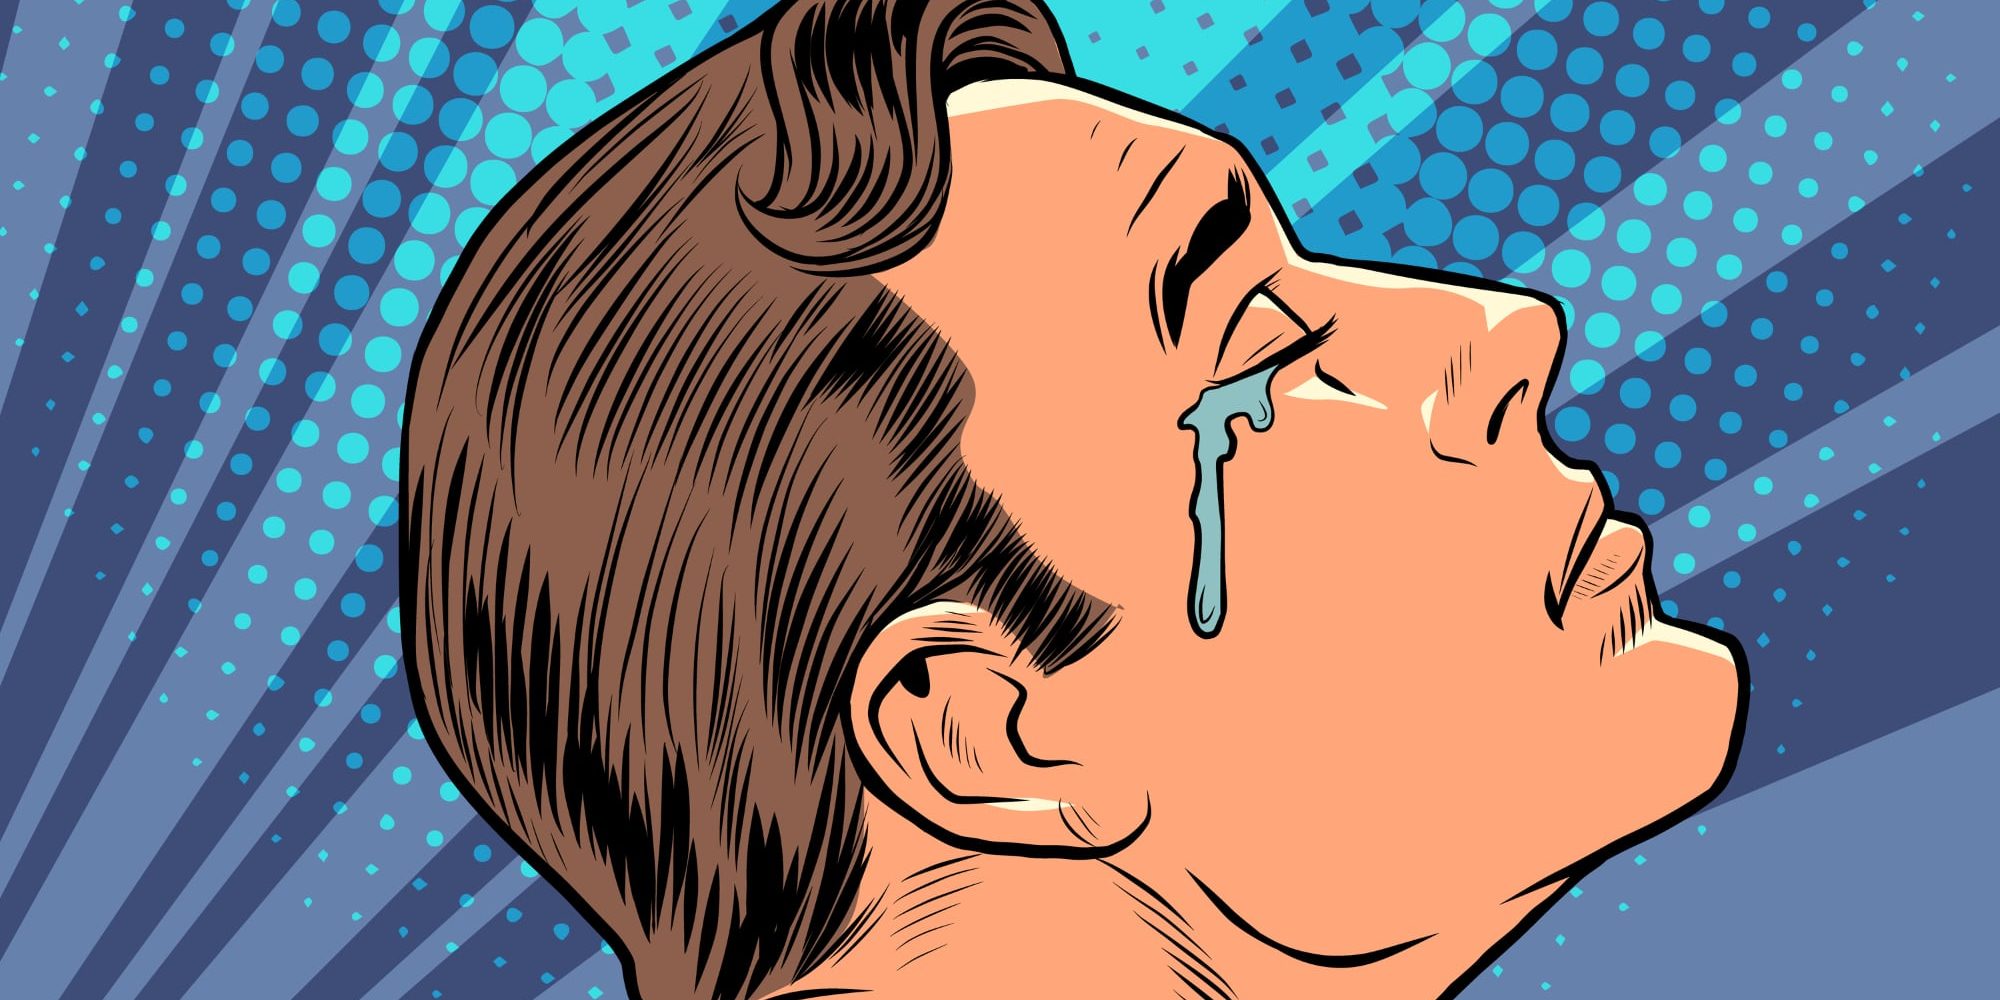 man crying - cartoon comic style picture of a man shedding tears